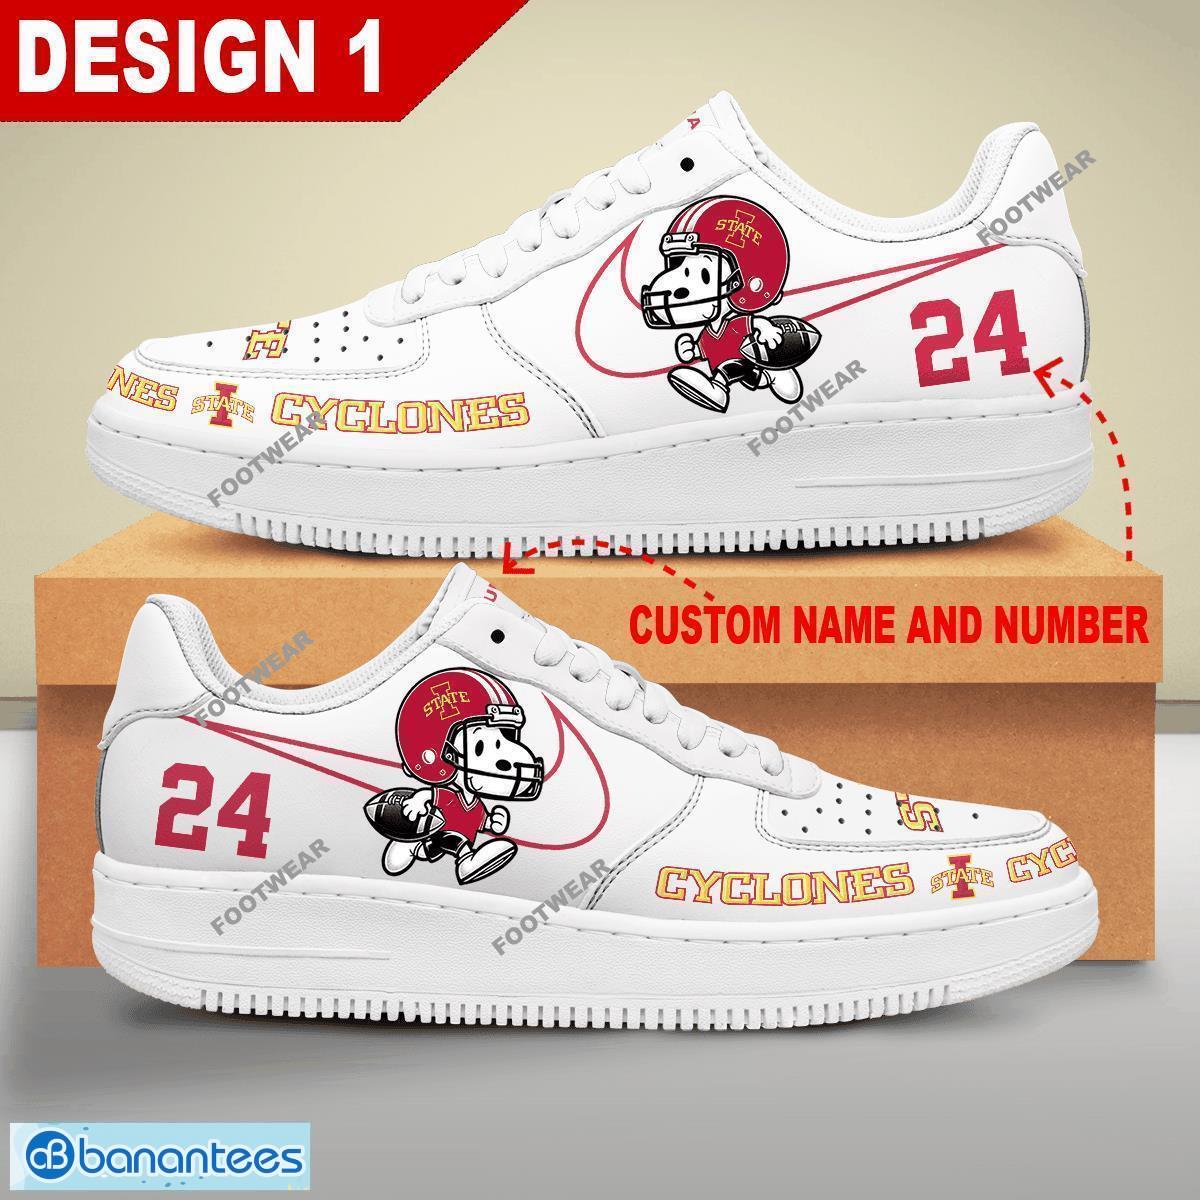 Custom Number And Name NCAA Iowa State Cyclones Snoopy Play Funny Football Air Force 1 Shoes Multiple Design - NCAA Iowa State Cyclones Snoopy Play Football Personalized Air Force 1 Shoes Design 1